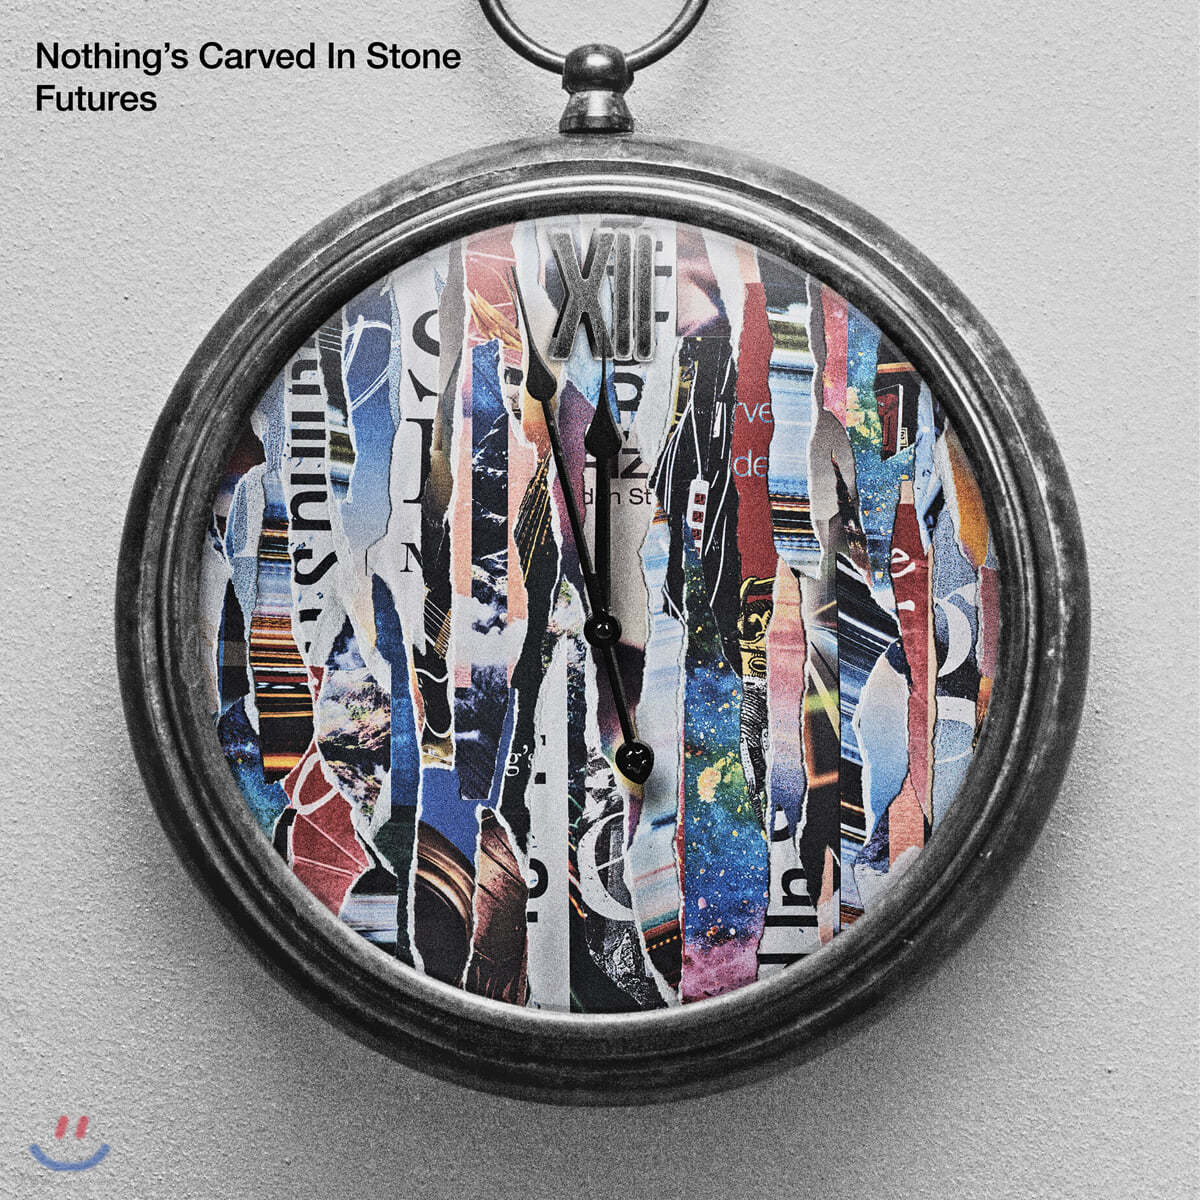 Nothing's Carved In Stone (낫띵즈 카브드 인 스톤) - Futures